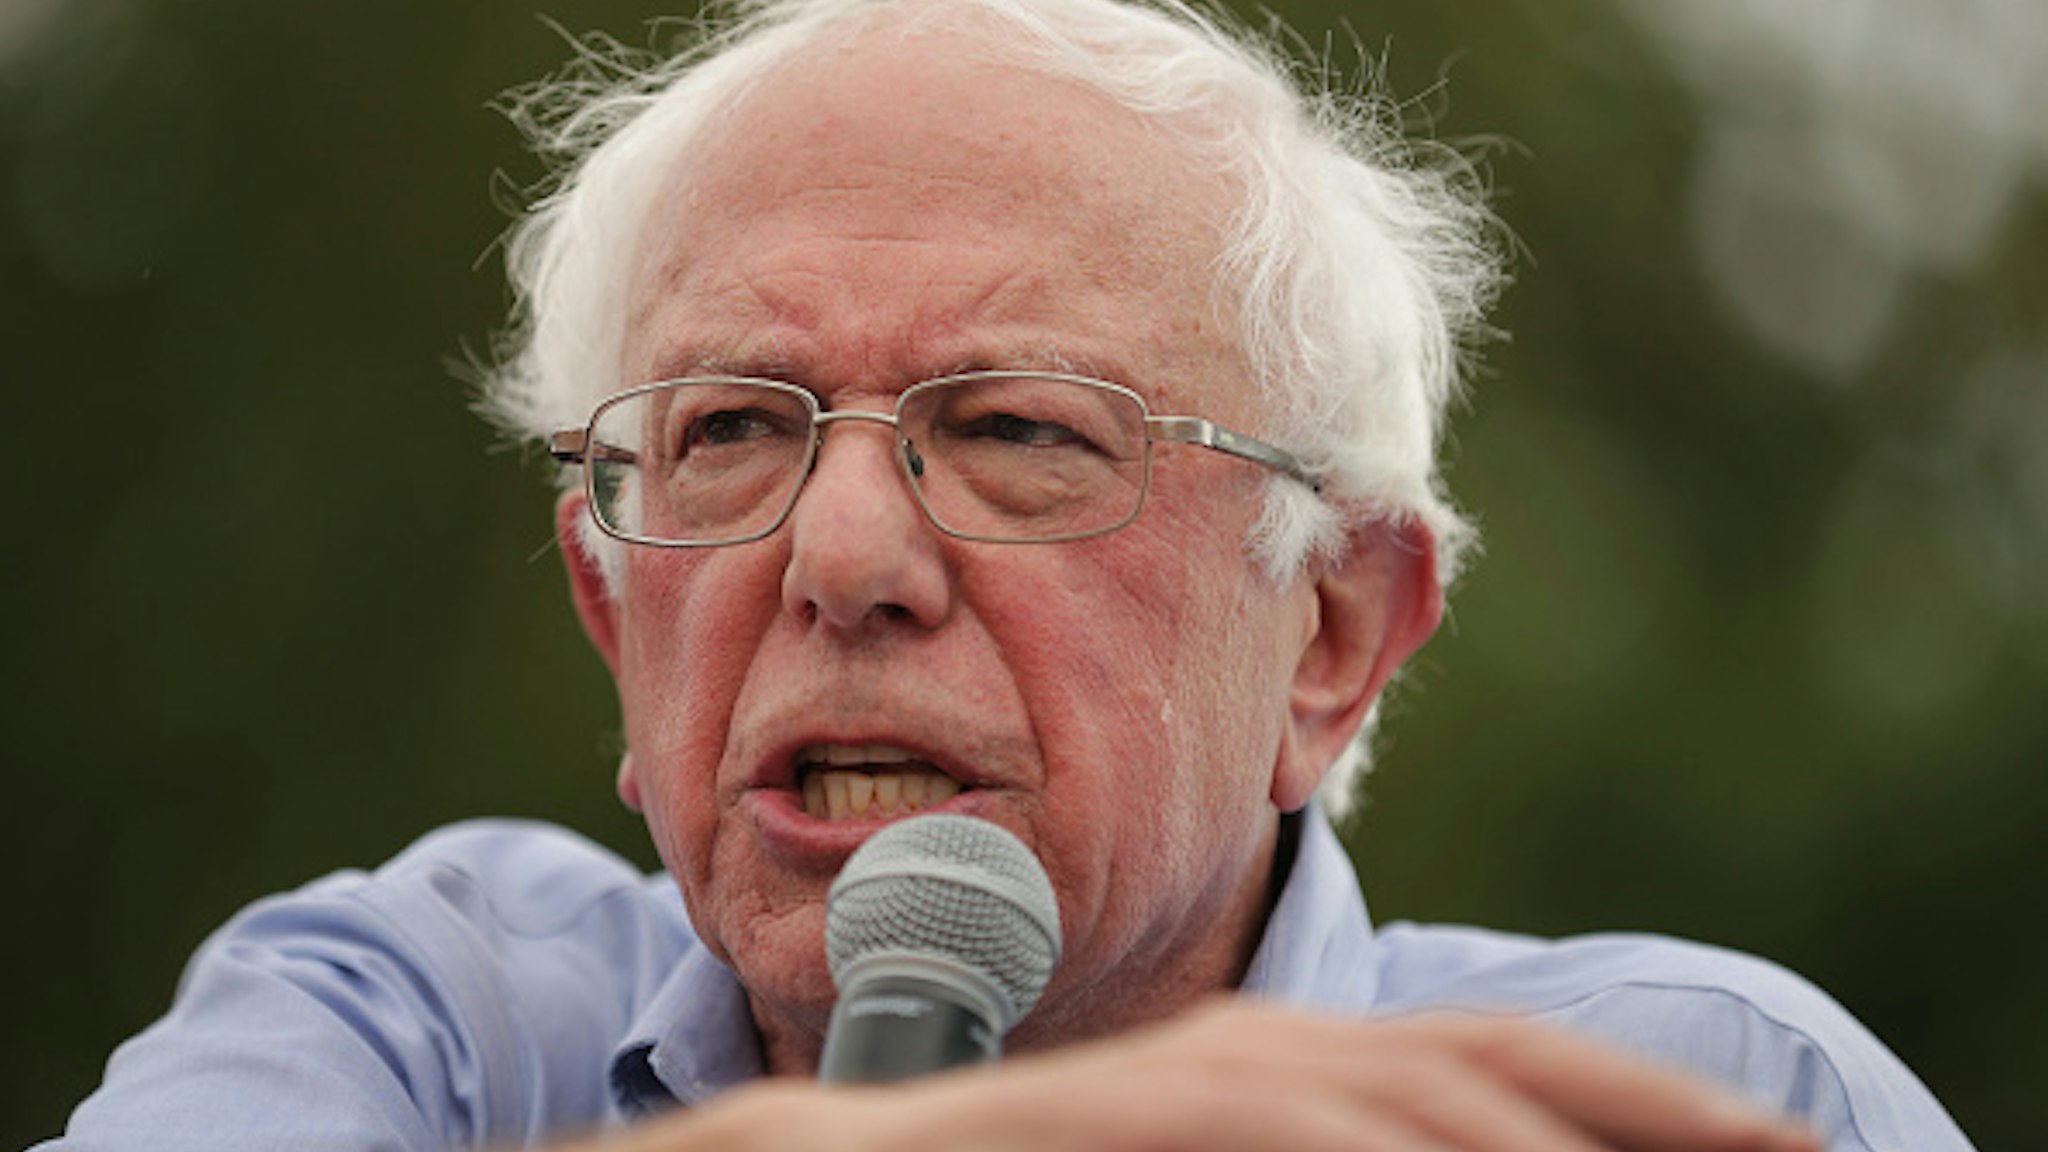 DES MOINES, IOWA - AUGUST 11: Democratic presidential candidate Sen. Bernie Sanders (I-VT) delivers a 20-minute campaign speech at the Des Moines Register Political Soapbox at the Iowa State Fair August 11, 2019 in Des Moines, Iowa. Twenty-two of the 23 politicians seeking the Democratic Party presidential nomination will be visiting the fair this week, six months ahead of the all-important Iowa caucuses.